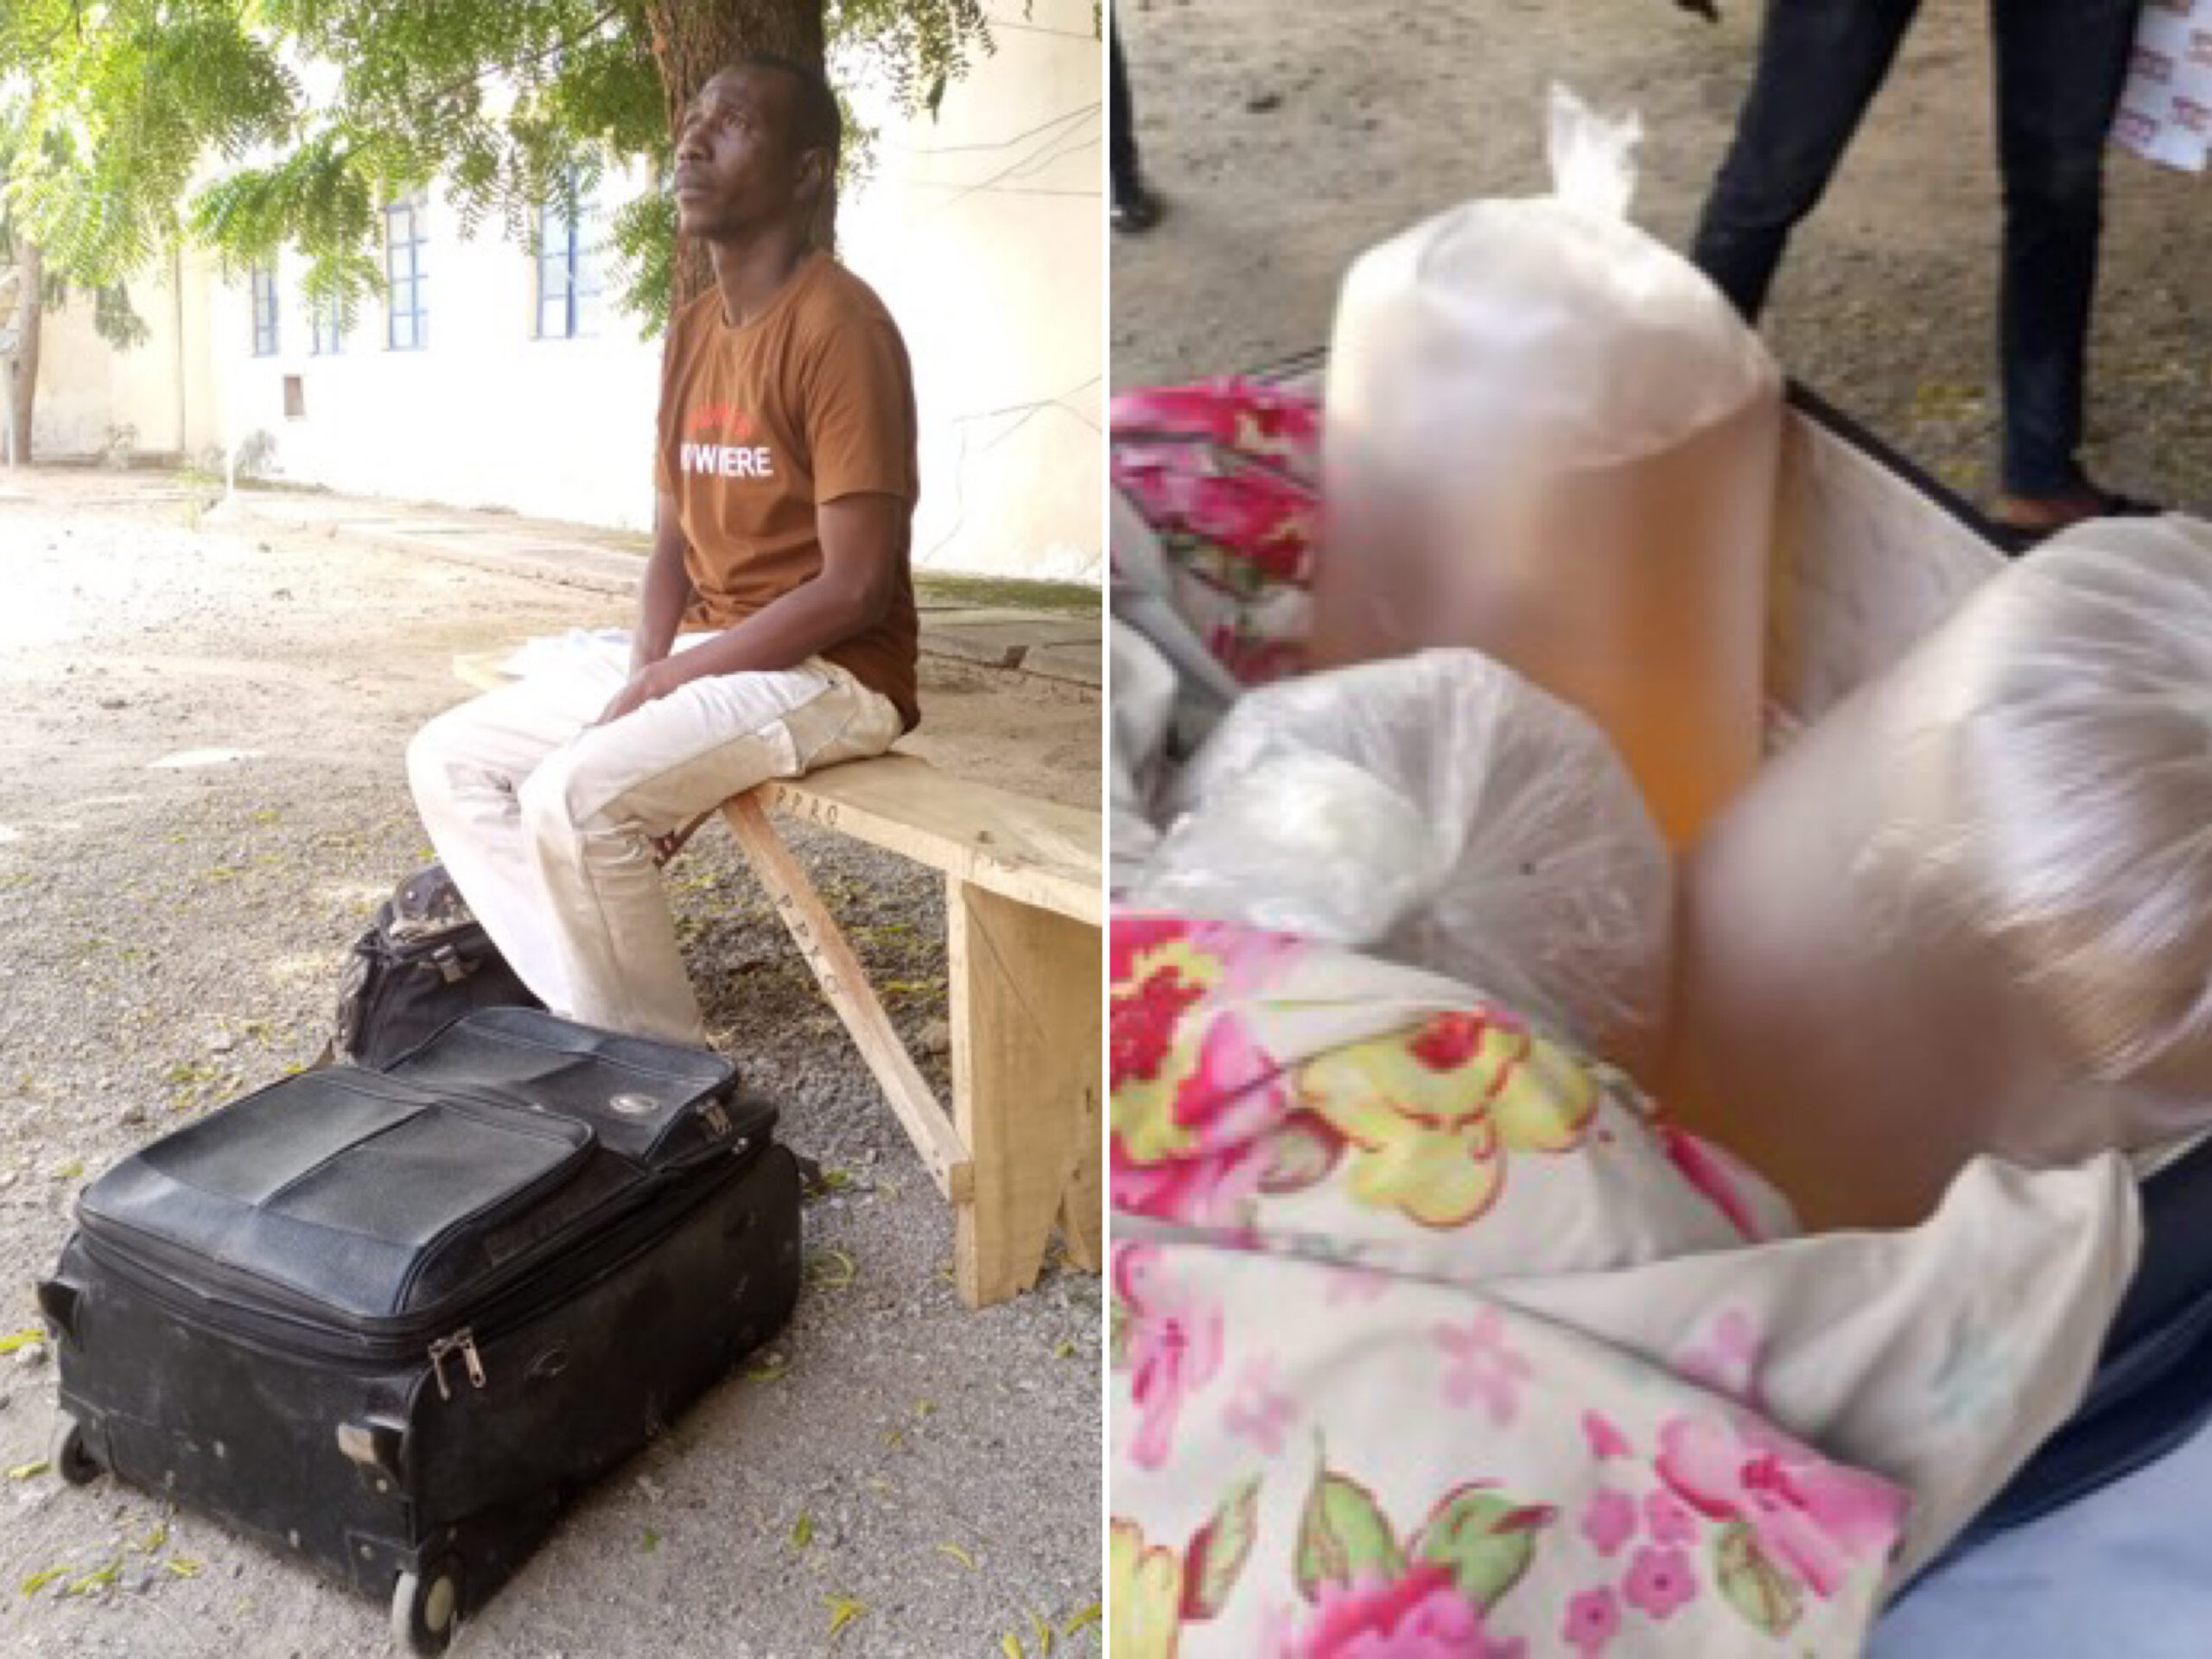 Katsina Police Arrest Man With 32 Litres Of Petrol Concealed In Travelling Bag